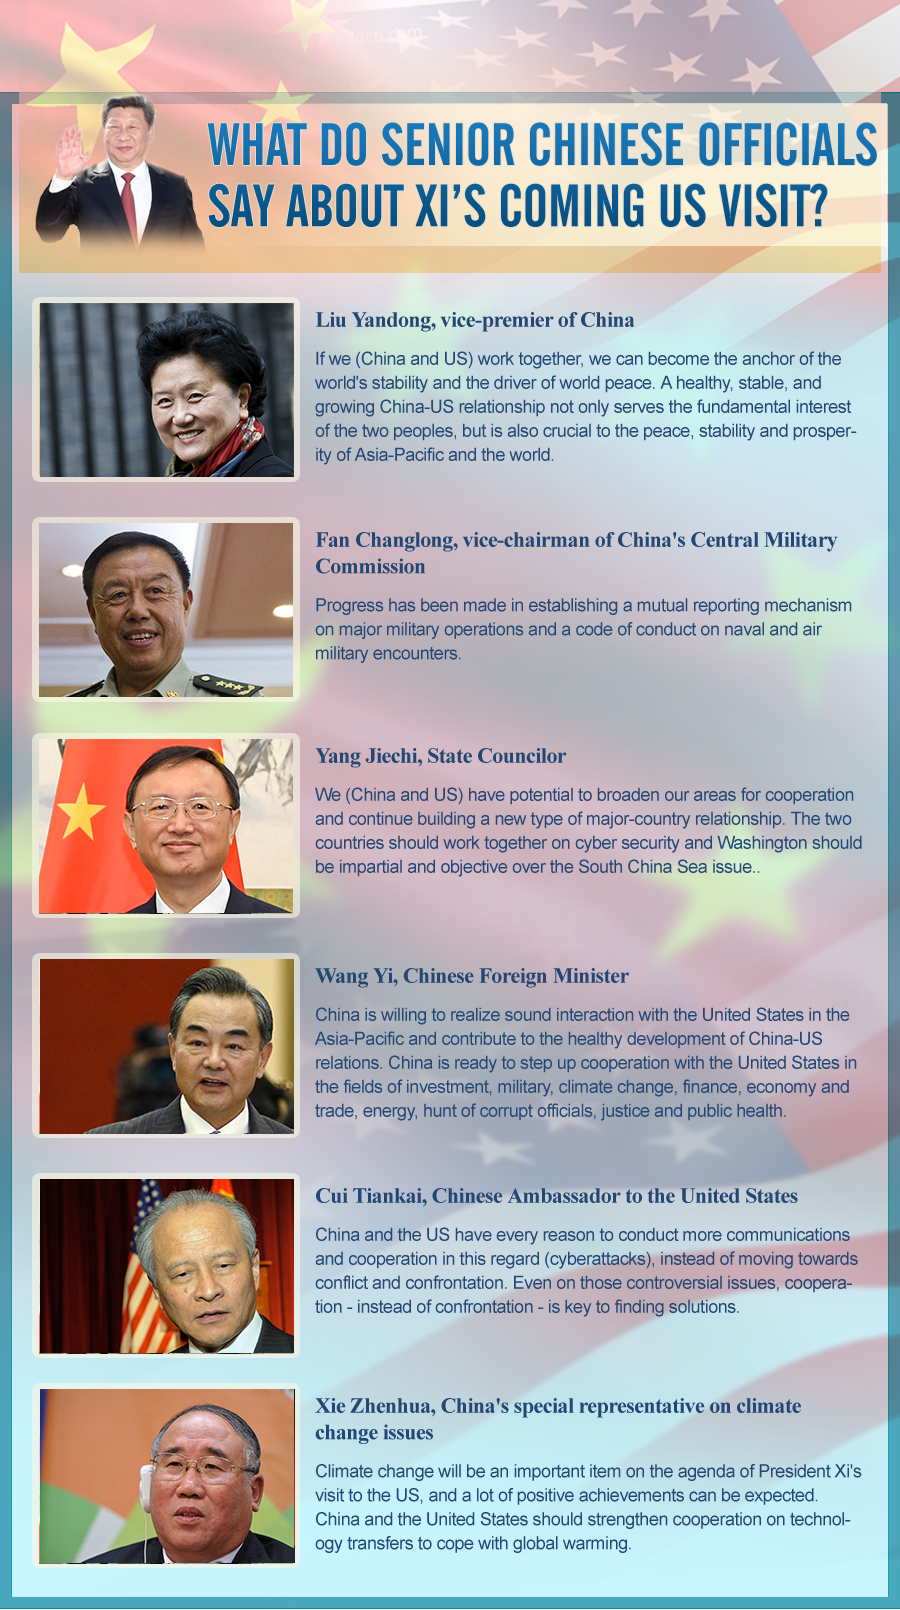 What do senior Chinese officials say about Xi's coming US visit?